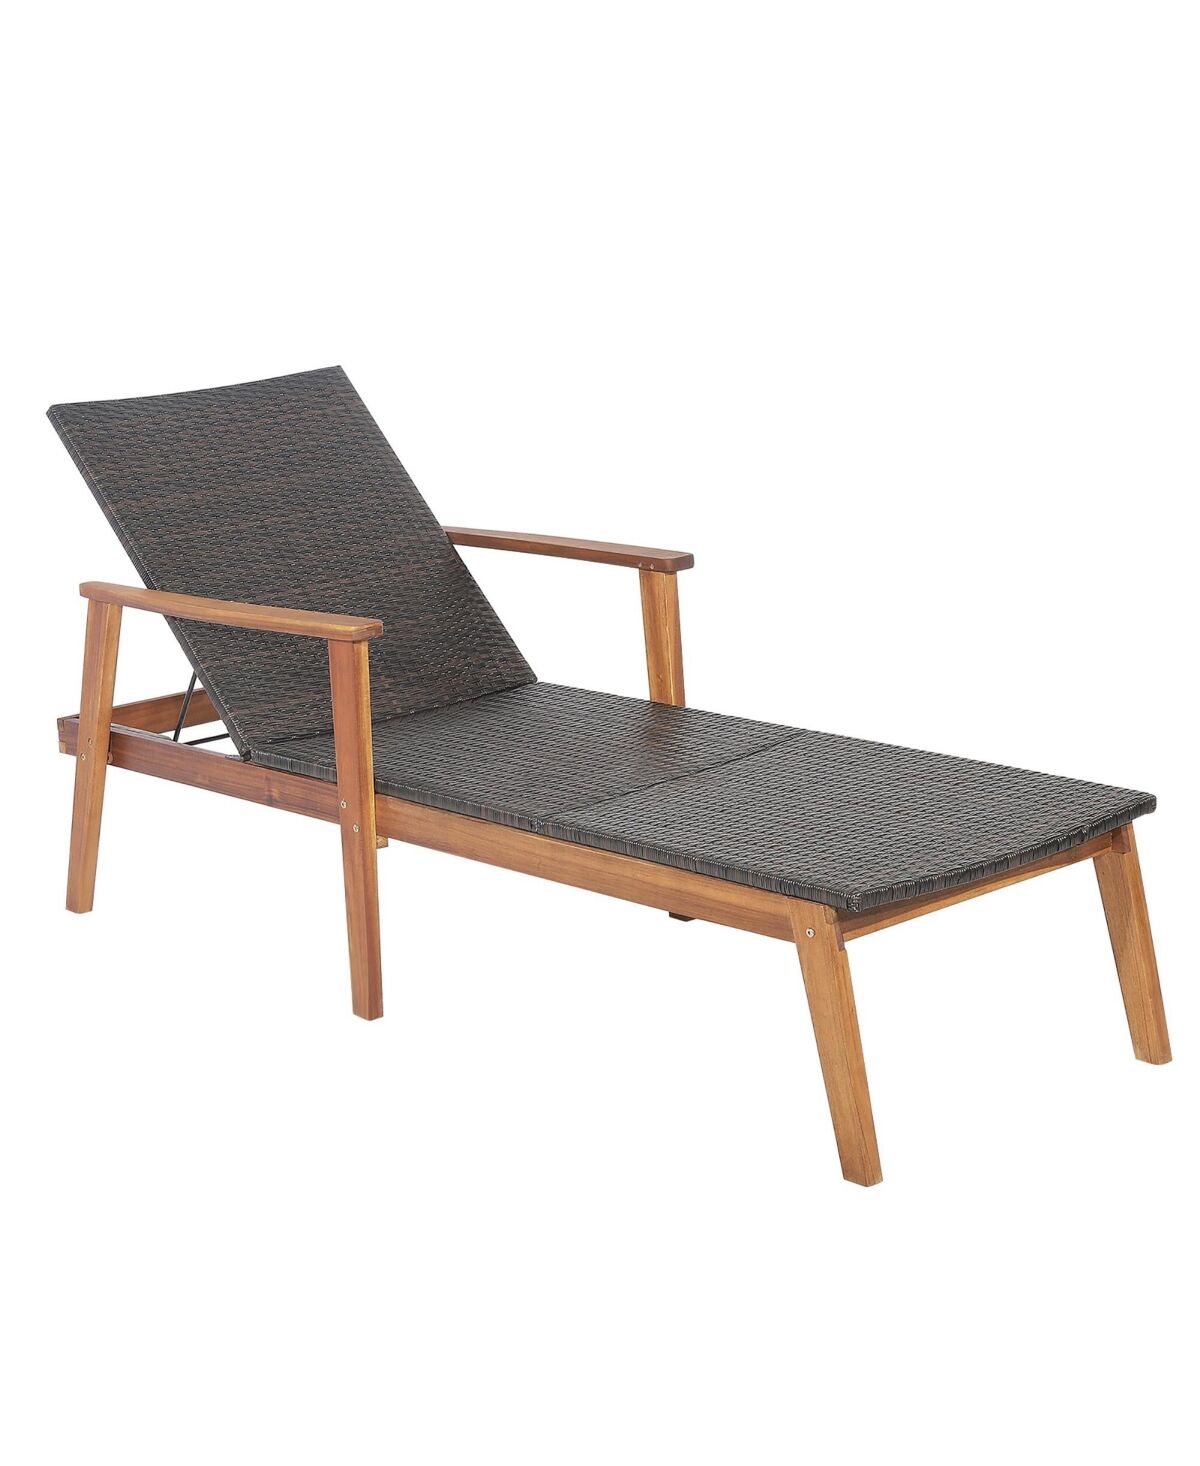 Costway Patio Rattan Chaise Lounge Chair Recliner Back Adjustable Acacia Wood Garden - Brown